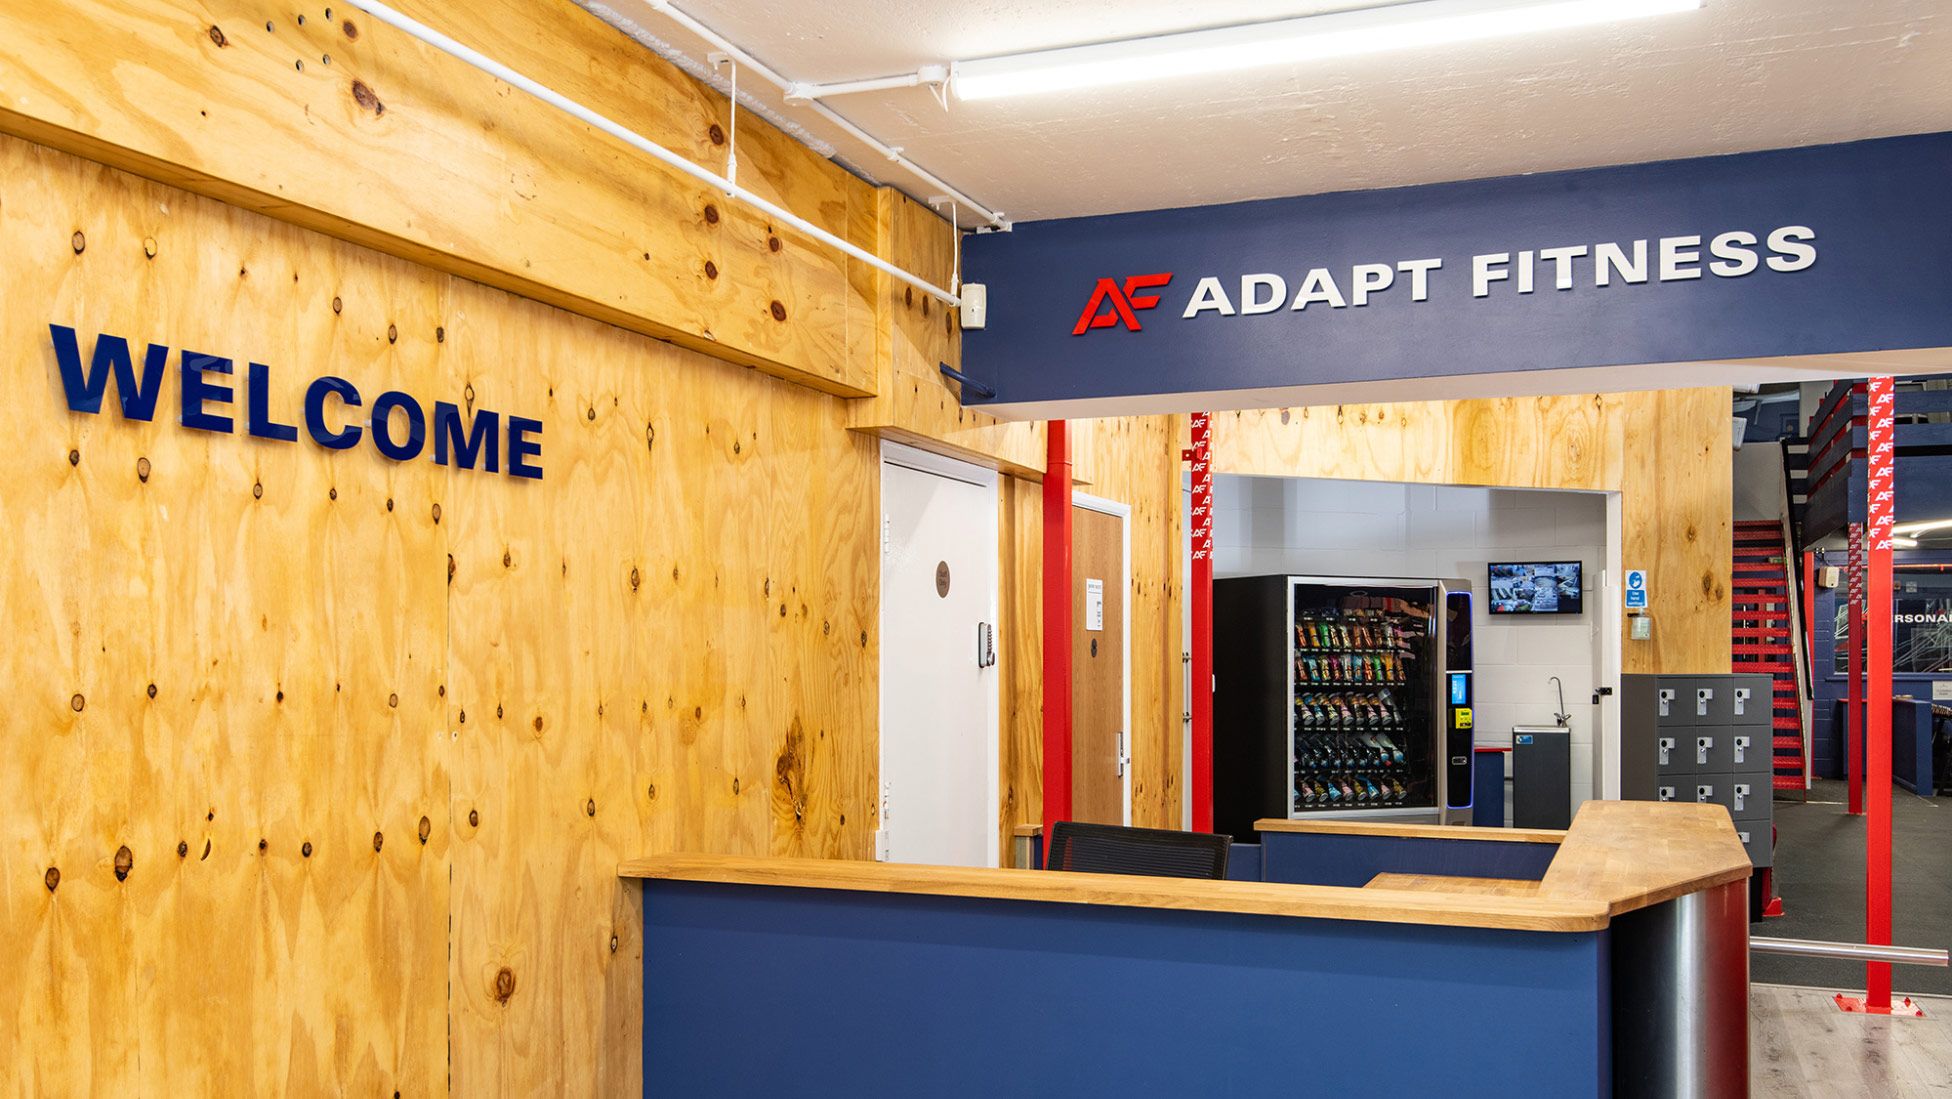 Gym reception area for Adapt Fitness